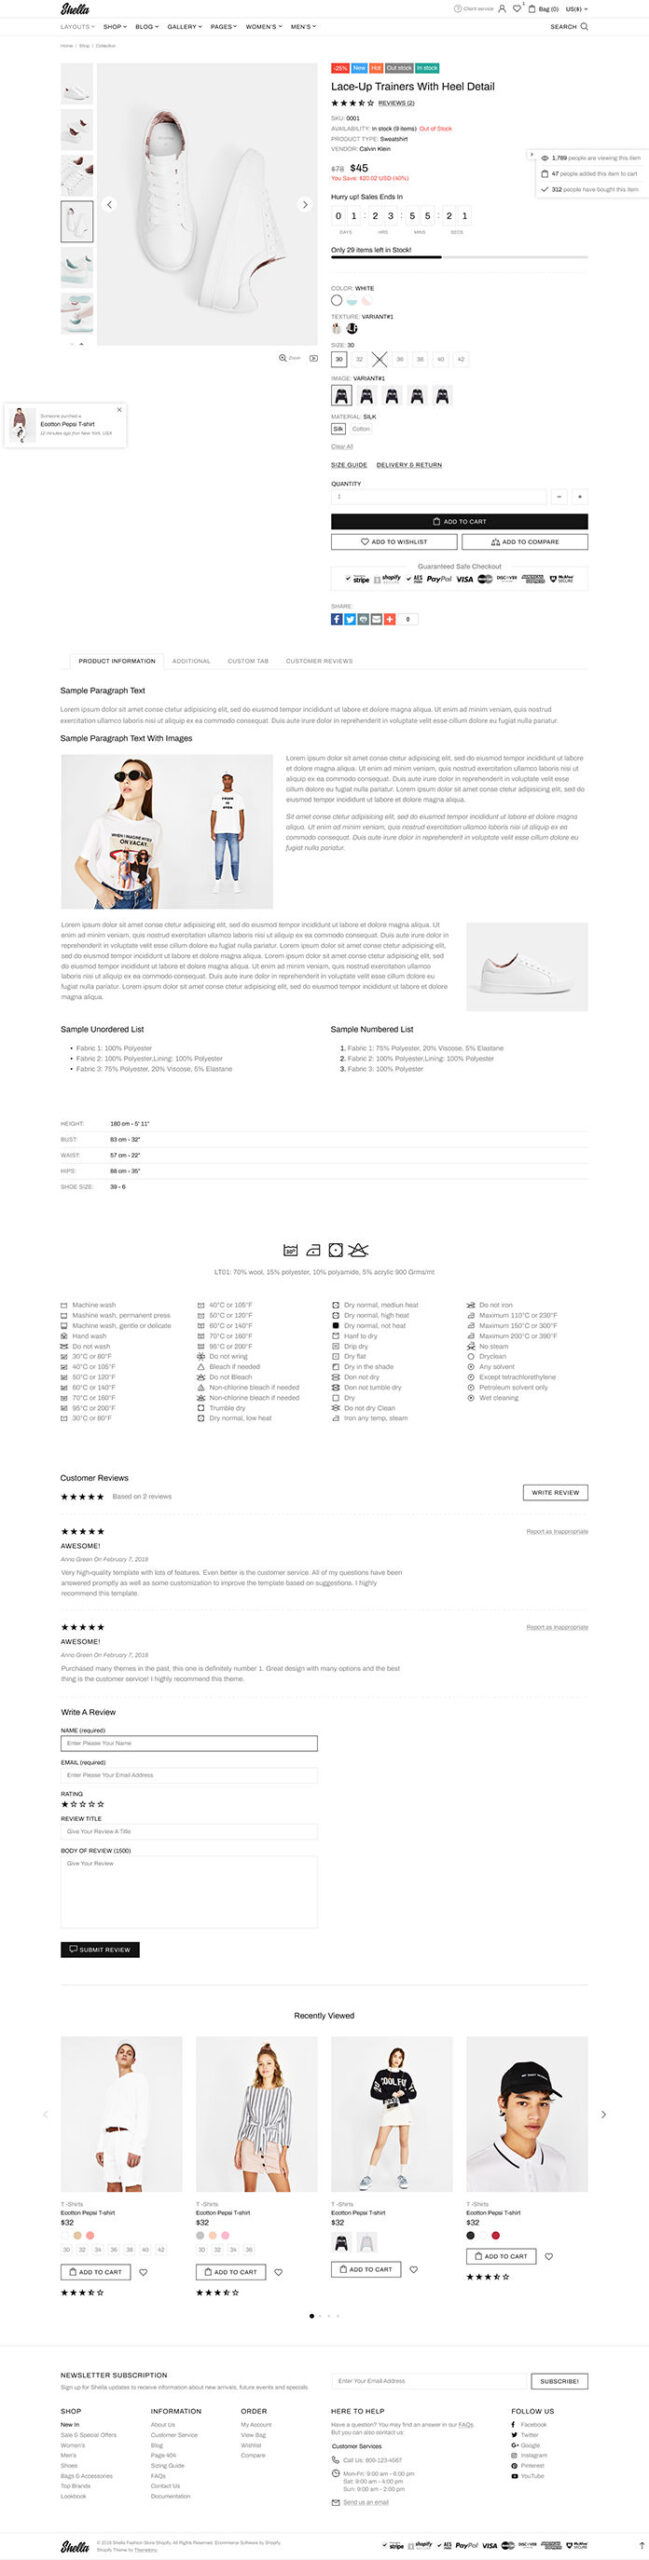 Product Page V1 2x Scaled